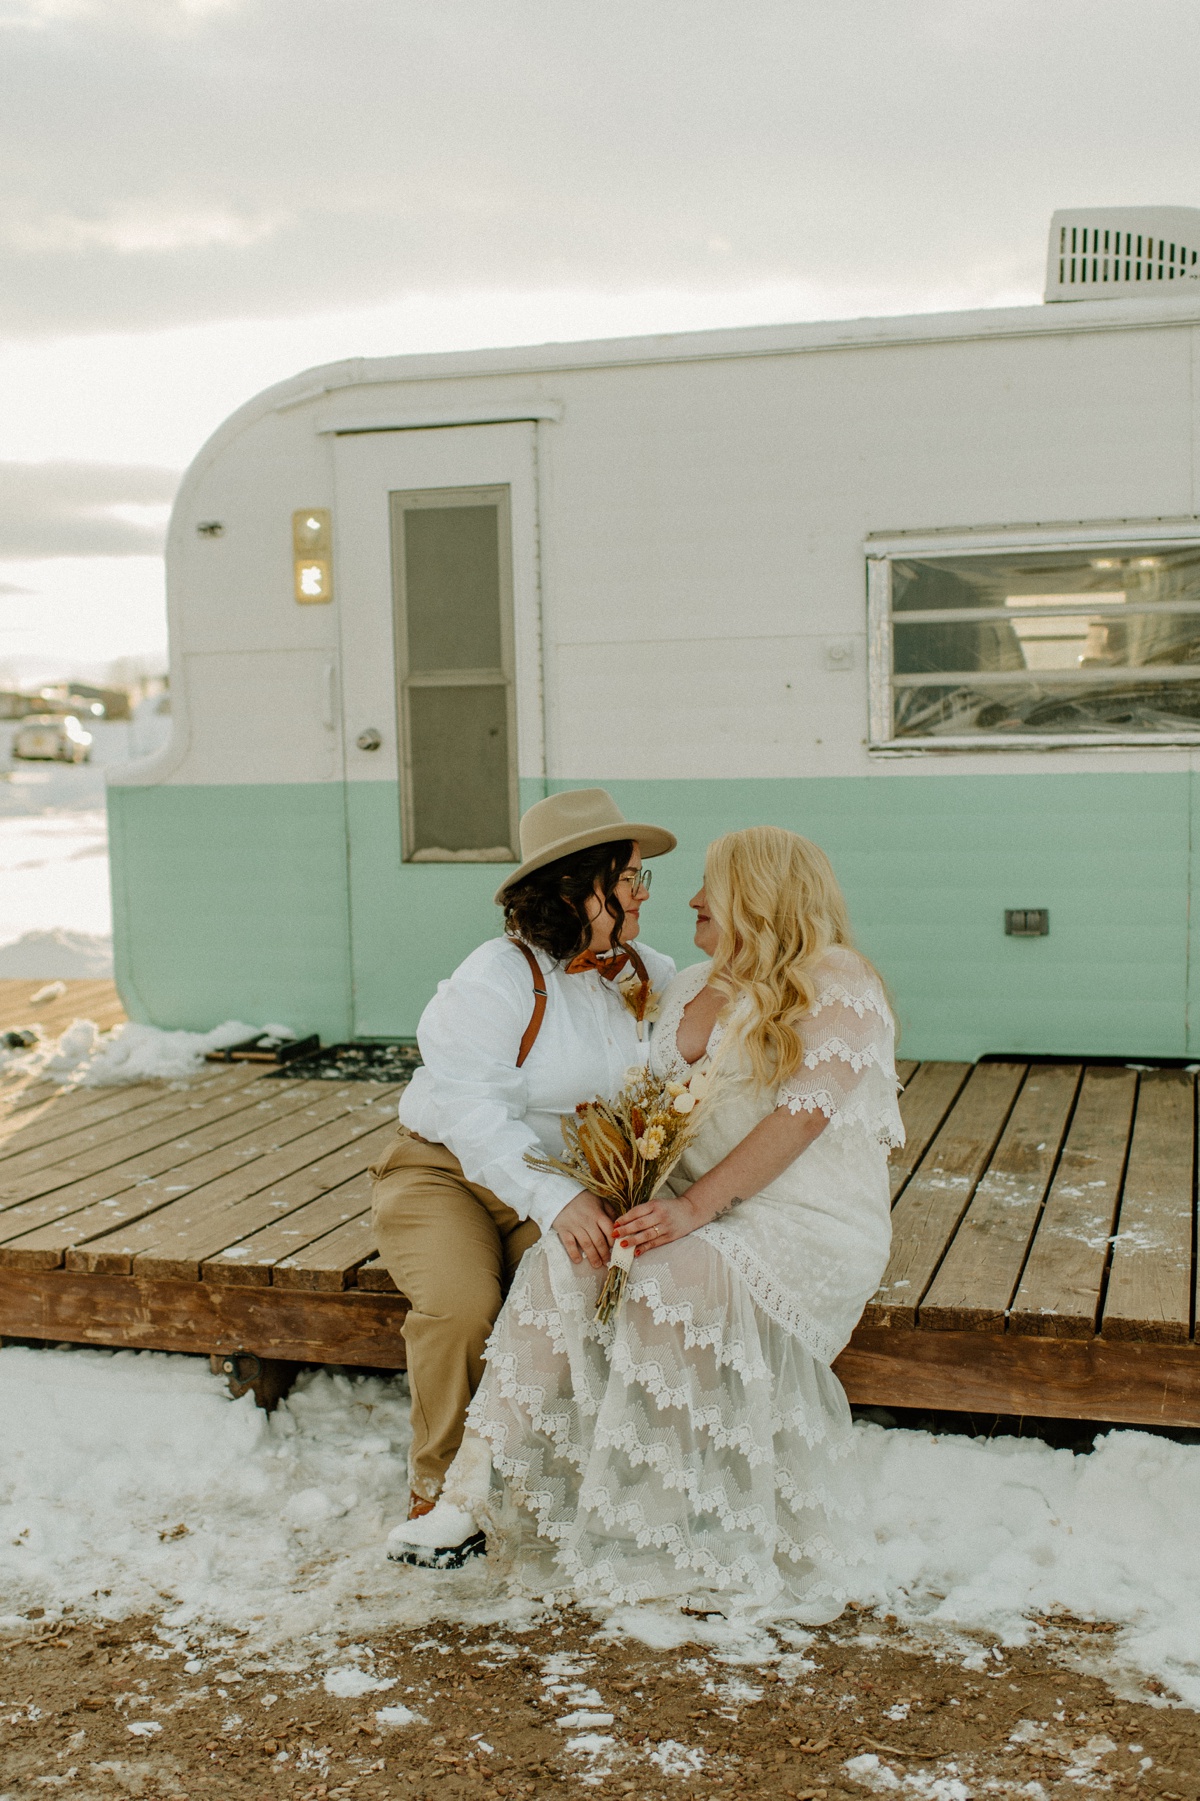 Brides take portraits at sunset outside their vintage camper in Taos New Mexico at the Hotel Luna Mystica